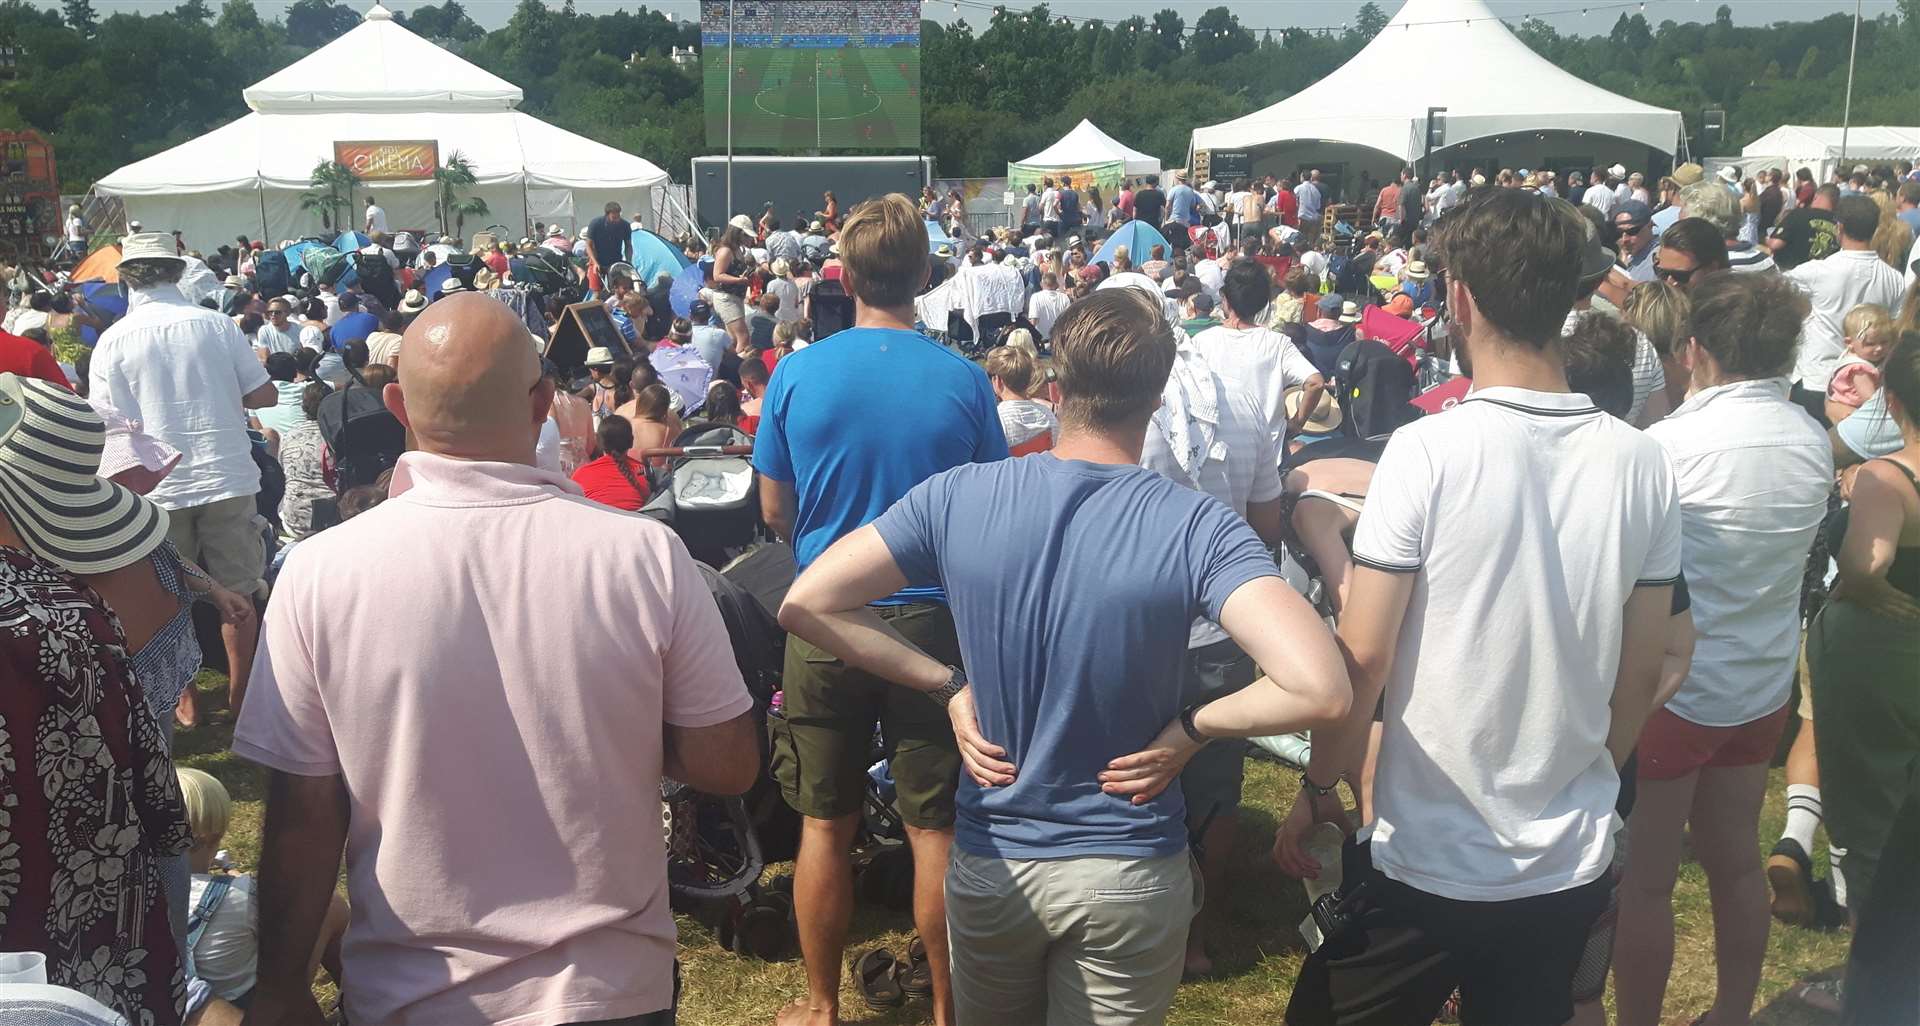 Fans watch the match at Pub in the Park in Tunbridge Wells (2925618)